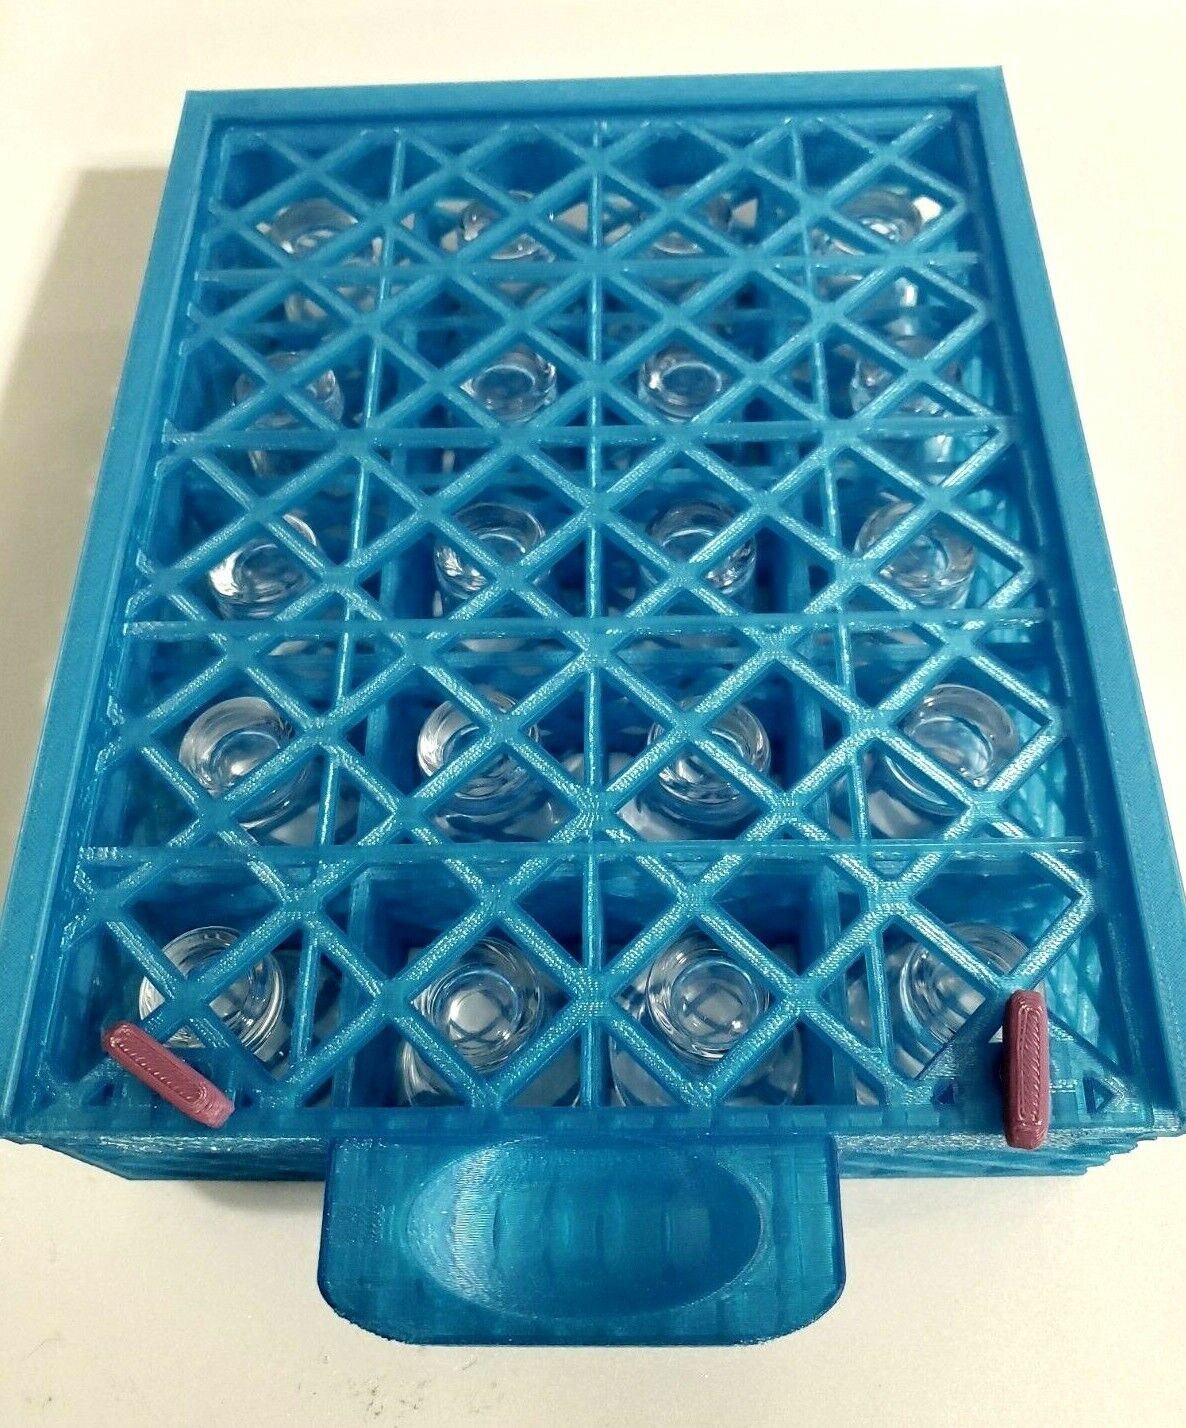 Dishwasher Holder Blue For Glass Communion Cups, 3d Printed For 20 1.5 Inch Cups